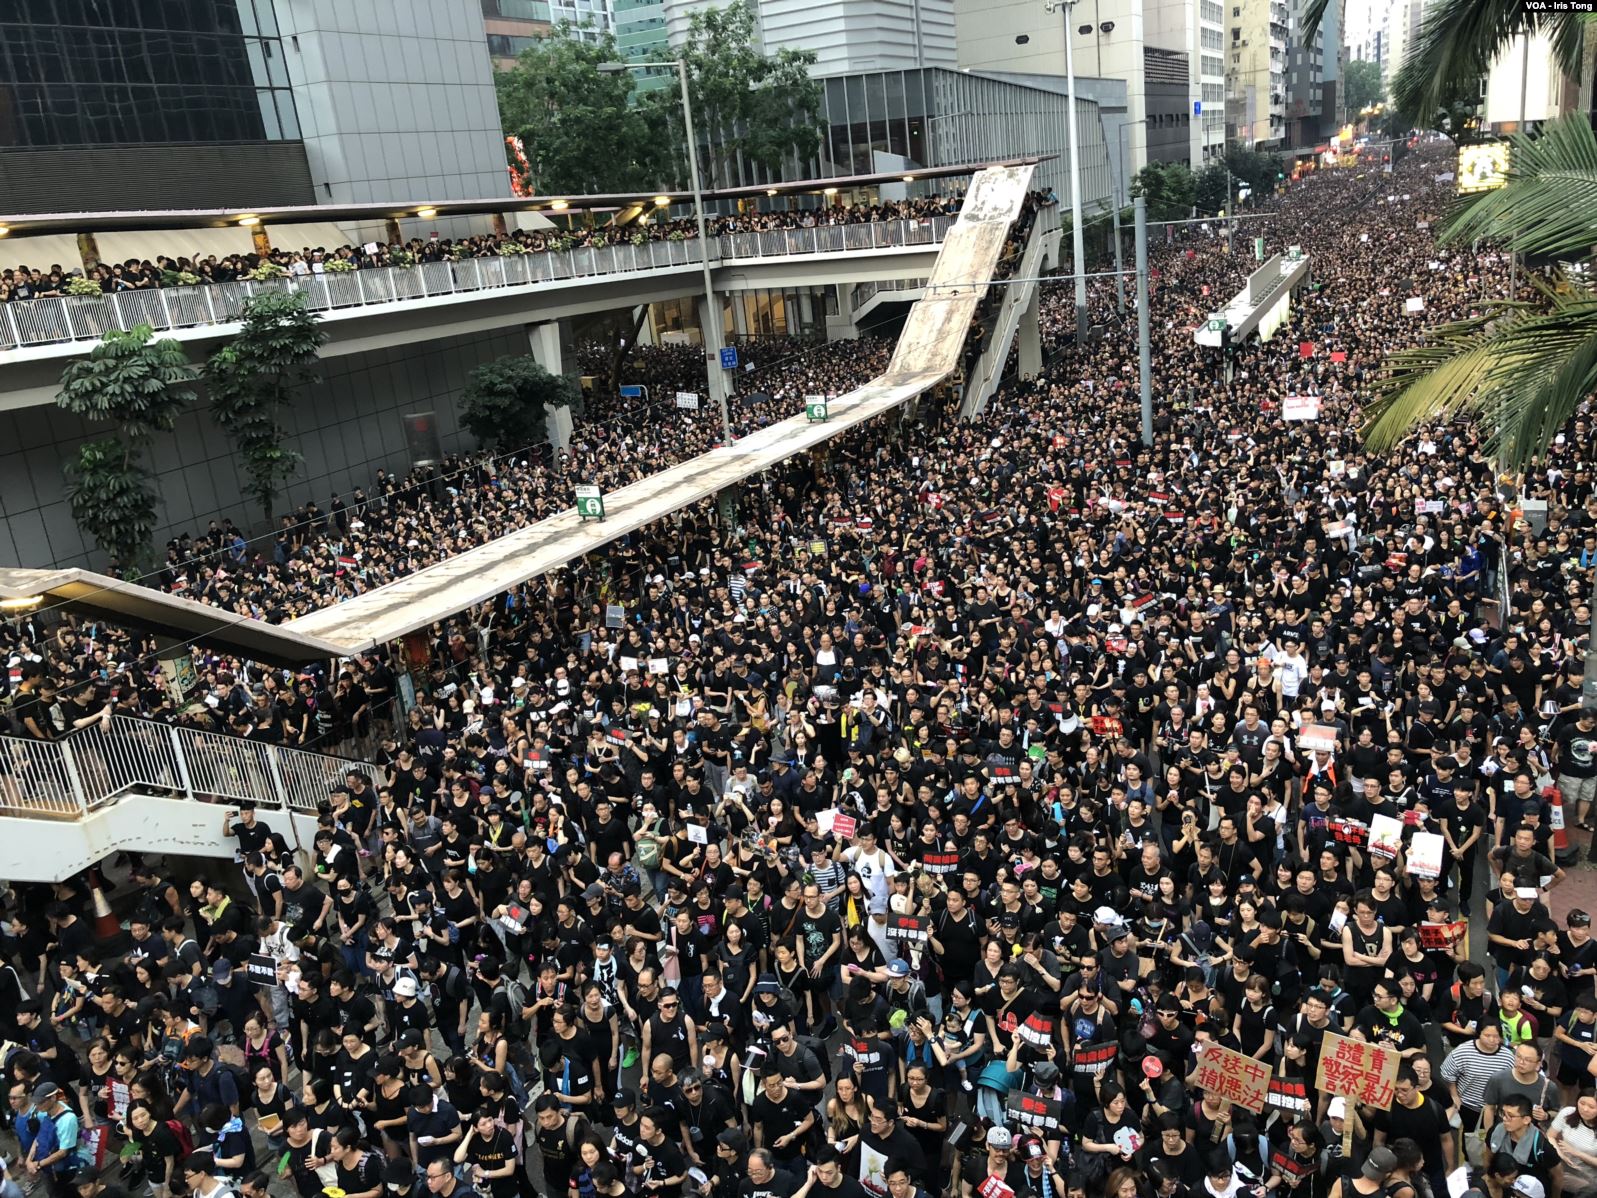 Does the Hong Kong Protest Have a Prayer? - Jerry Newcombe